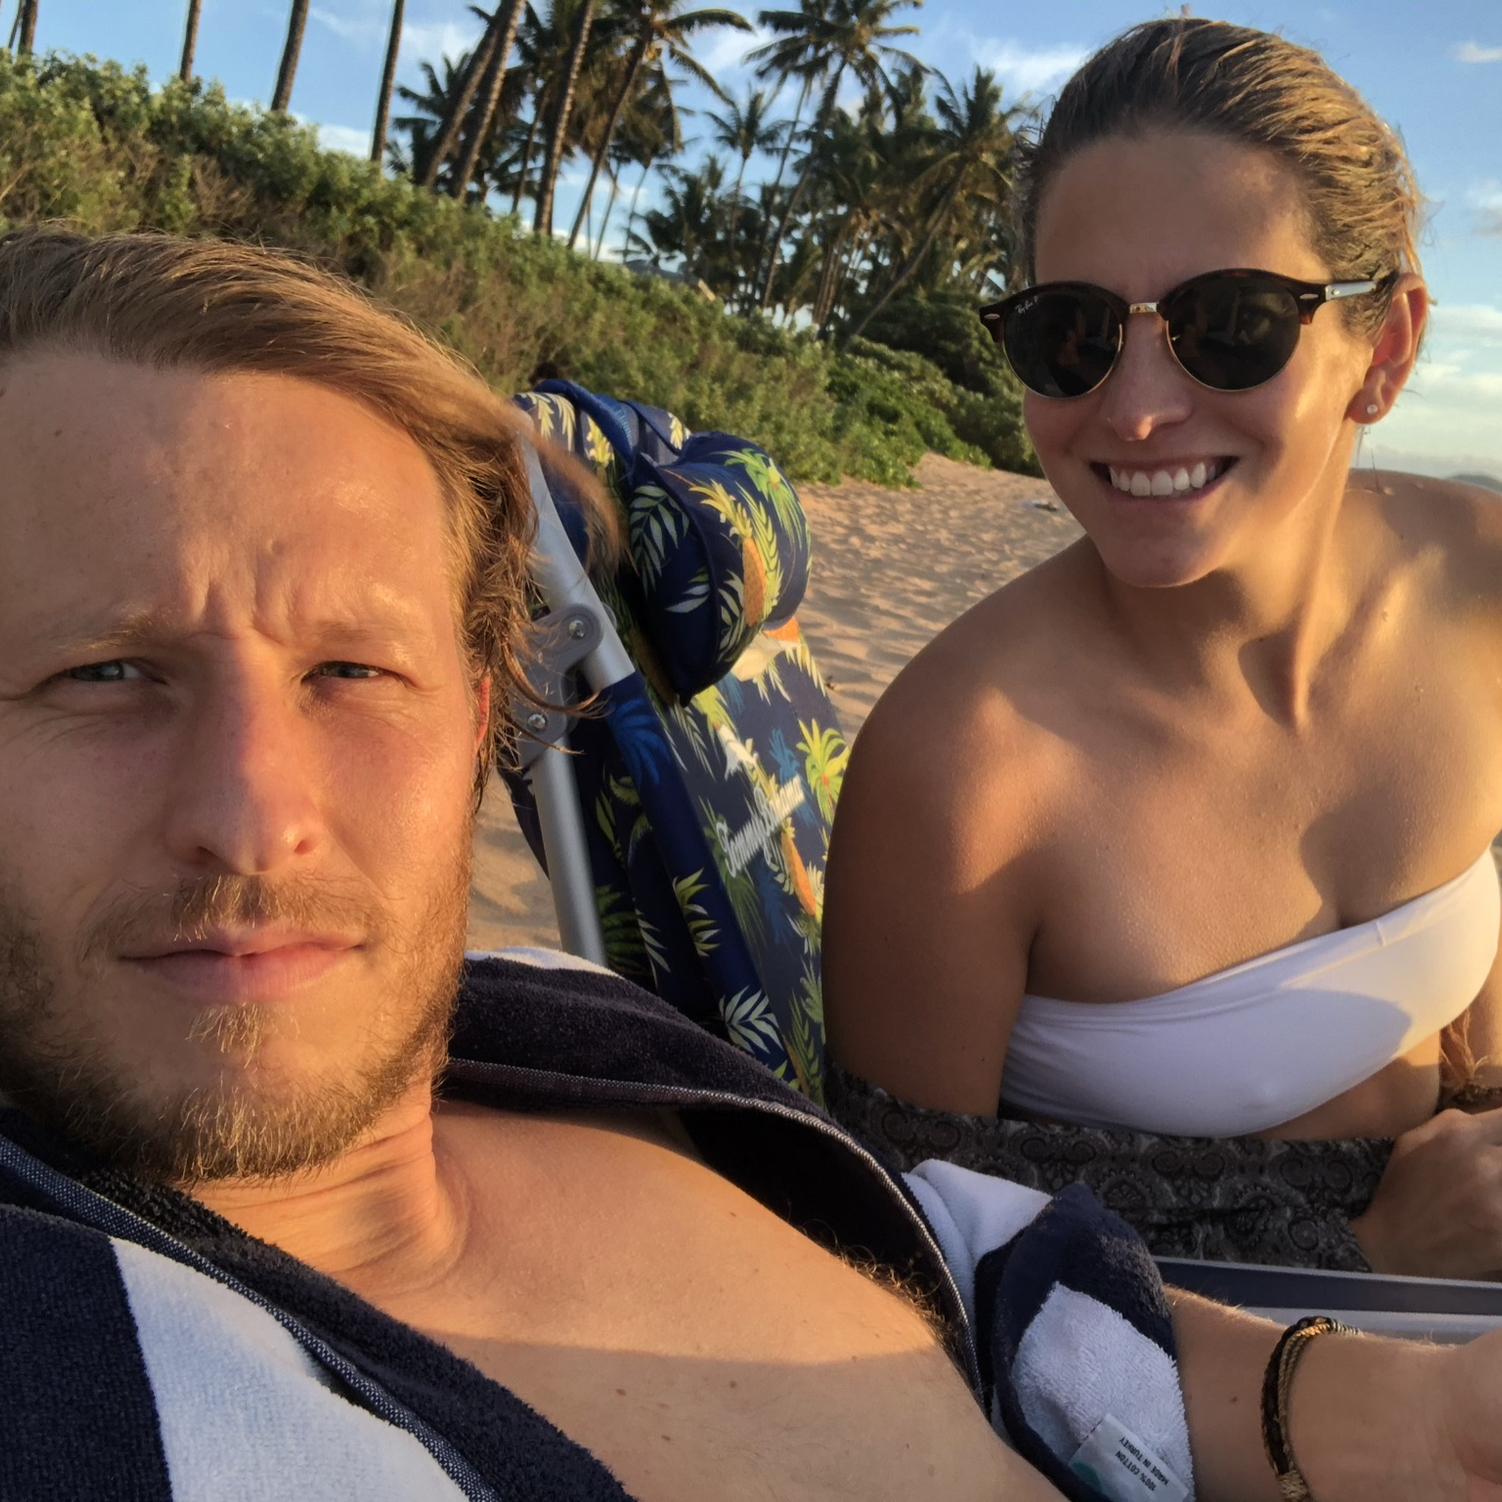 December 2020 - Feb 2021. We stayed on Moloka‘i and Maui for 3-months while working remotely.

Watching the sunset at Keawakapu Beach, Maui.